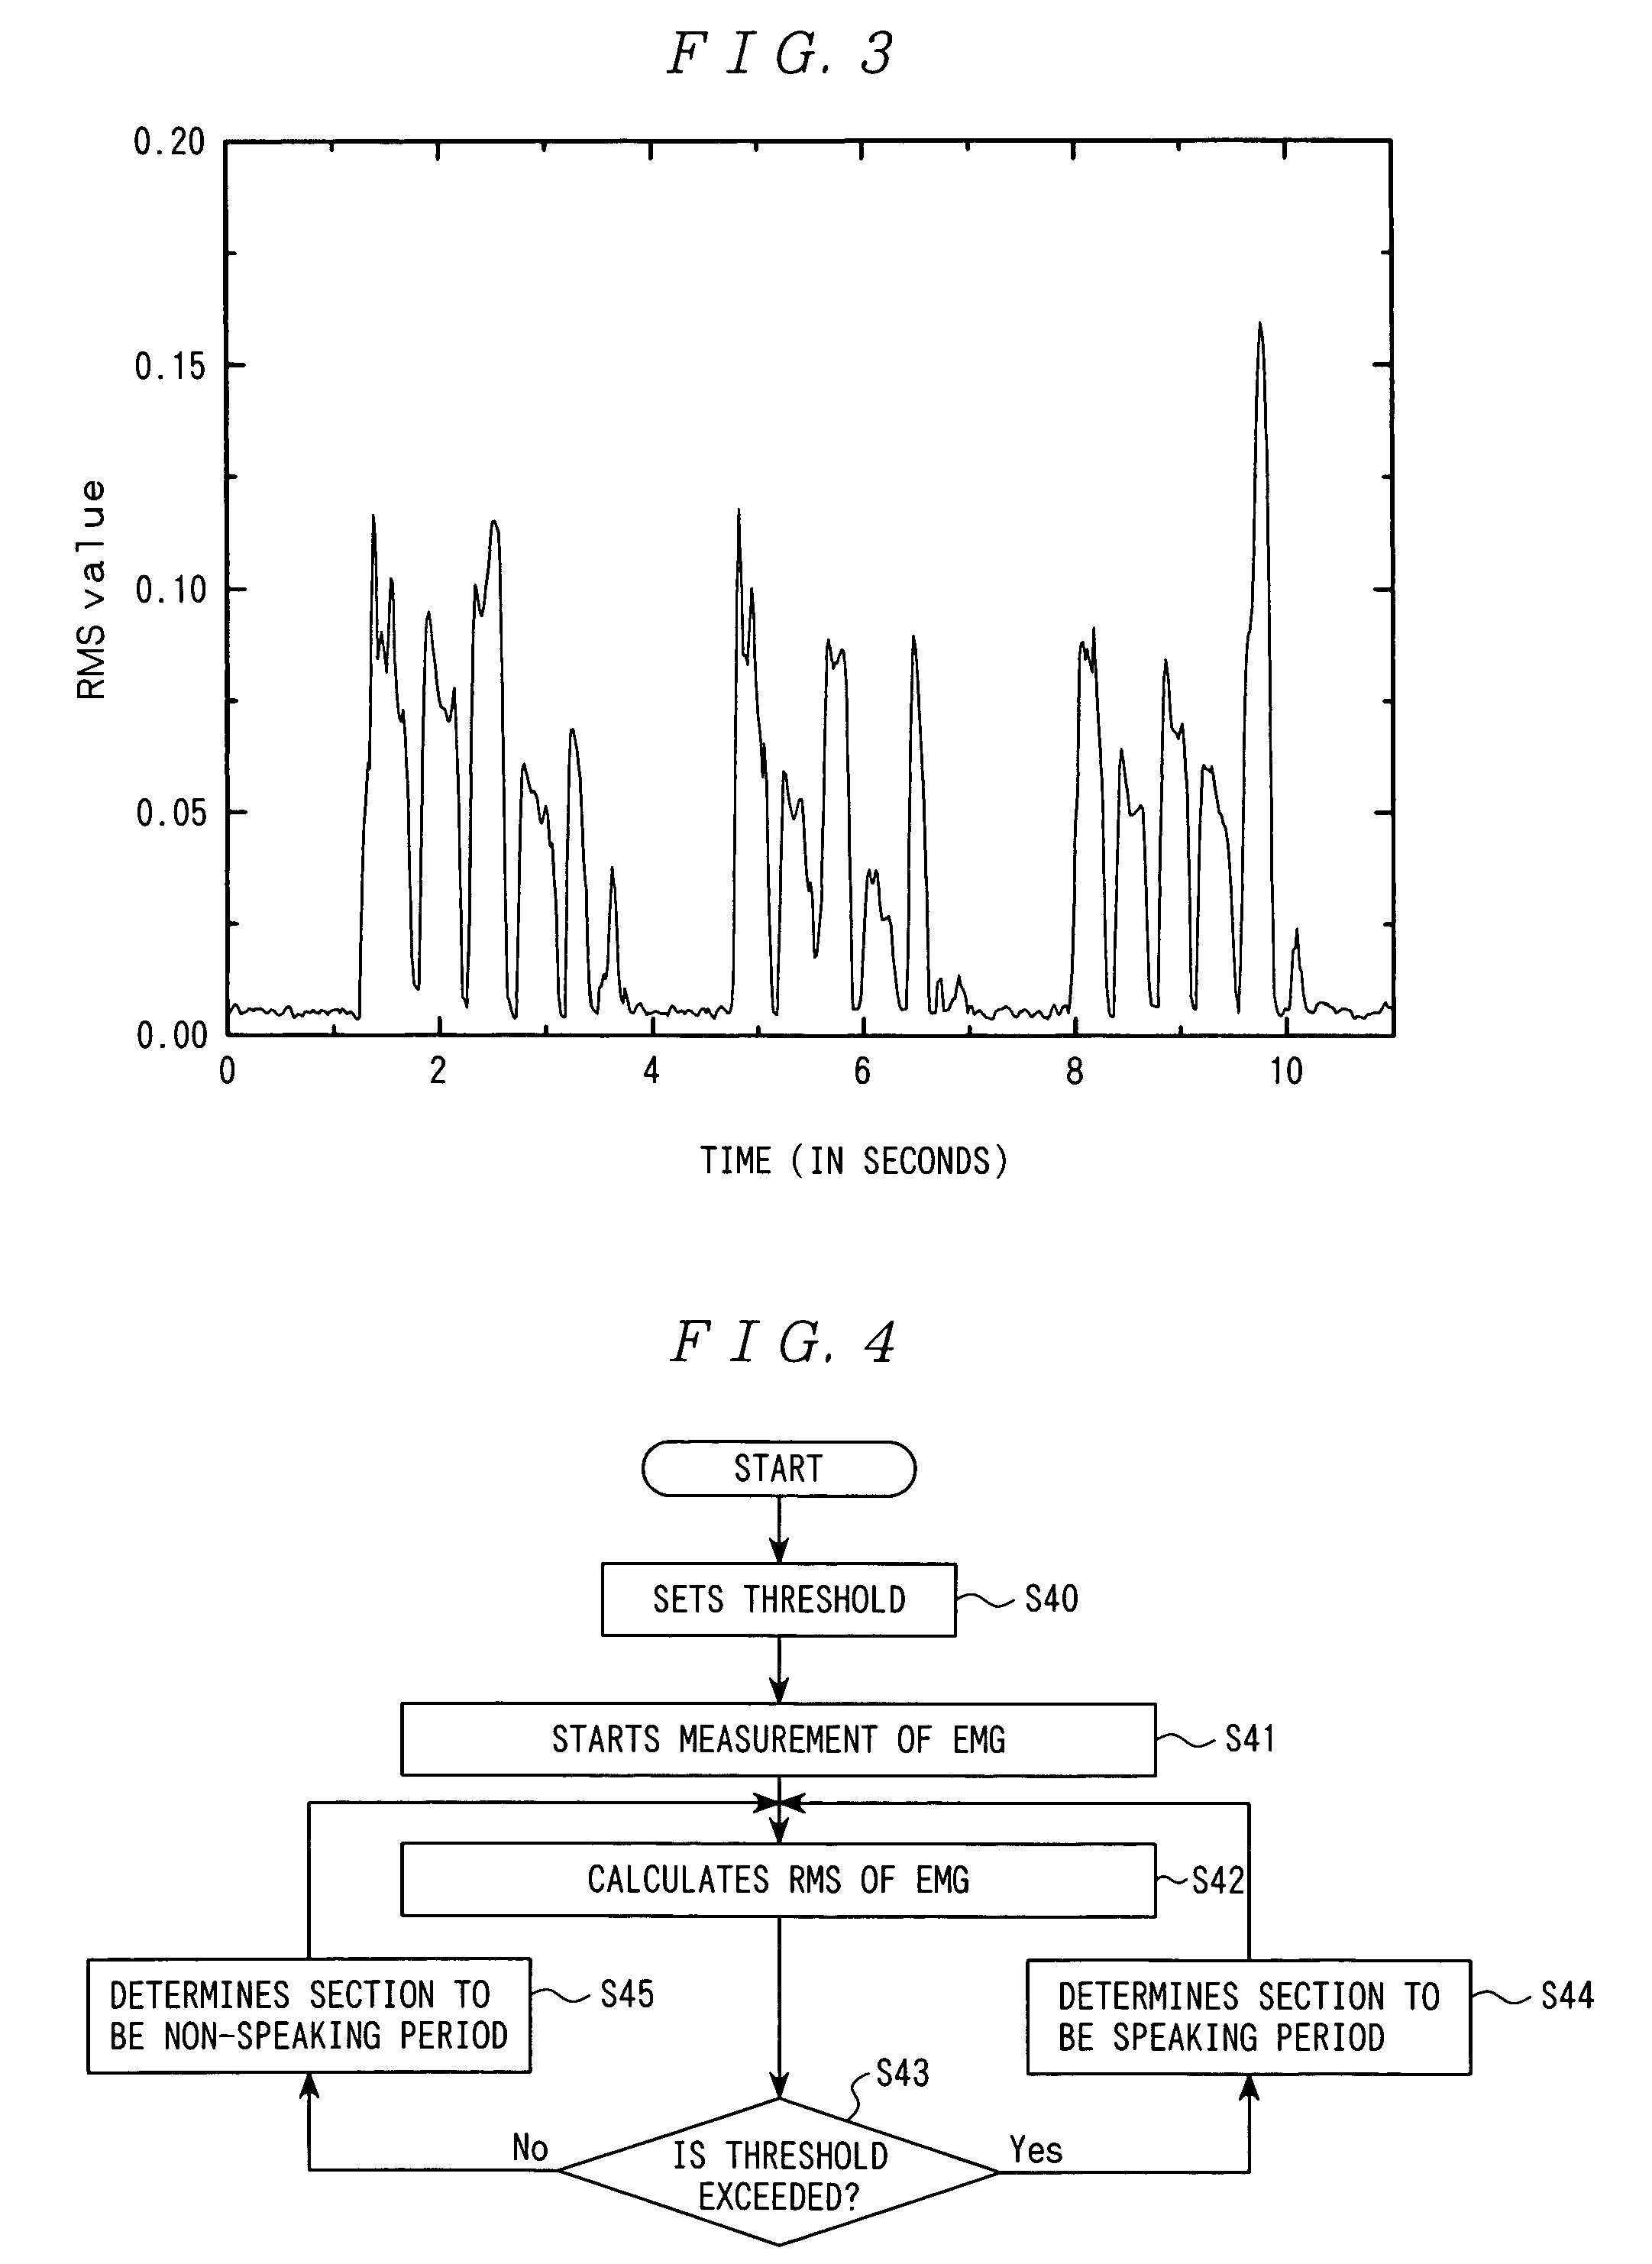 Speaking period detection device, voice recognition processing device, transmission system, signal level control device and speaking period detection method